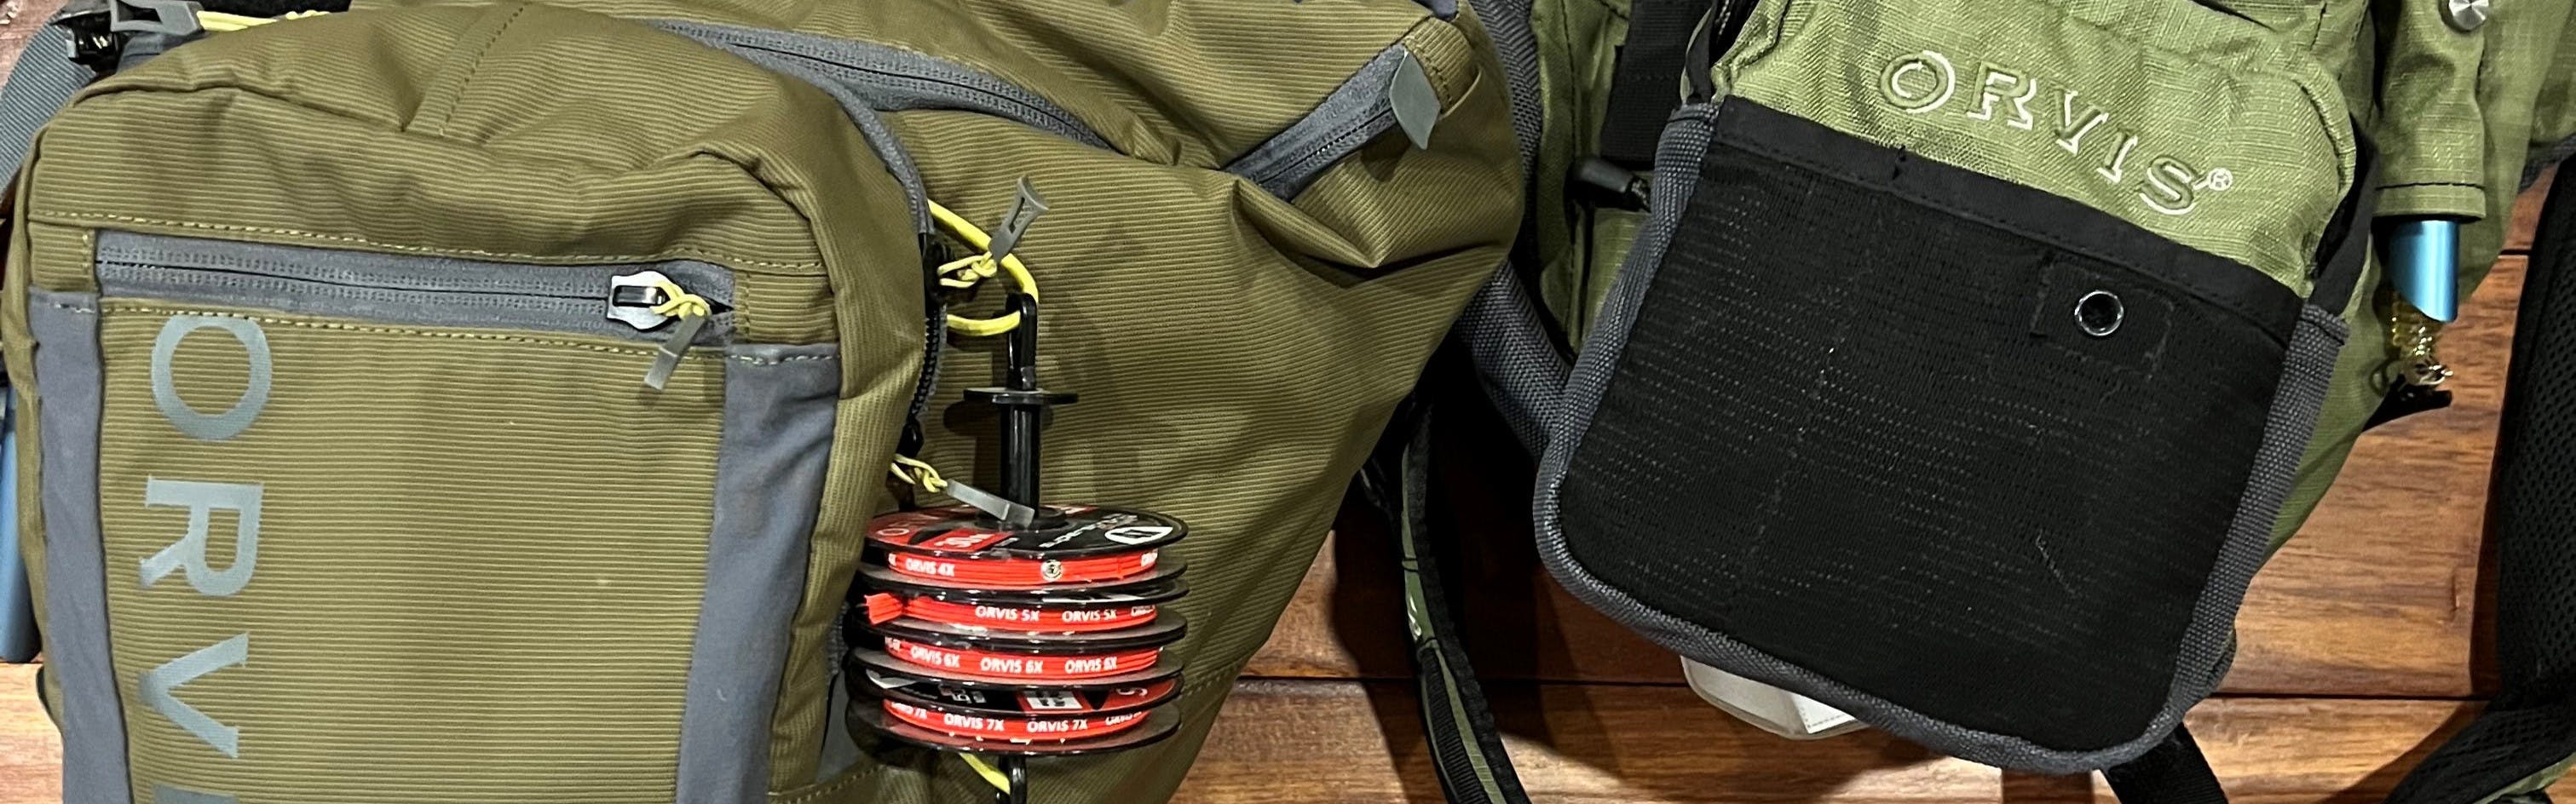 ALL NEW for 2021, Orvis Fly Fishing Packs & Bags